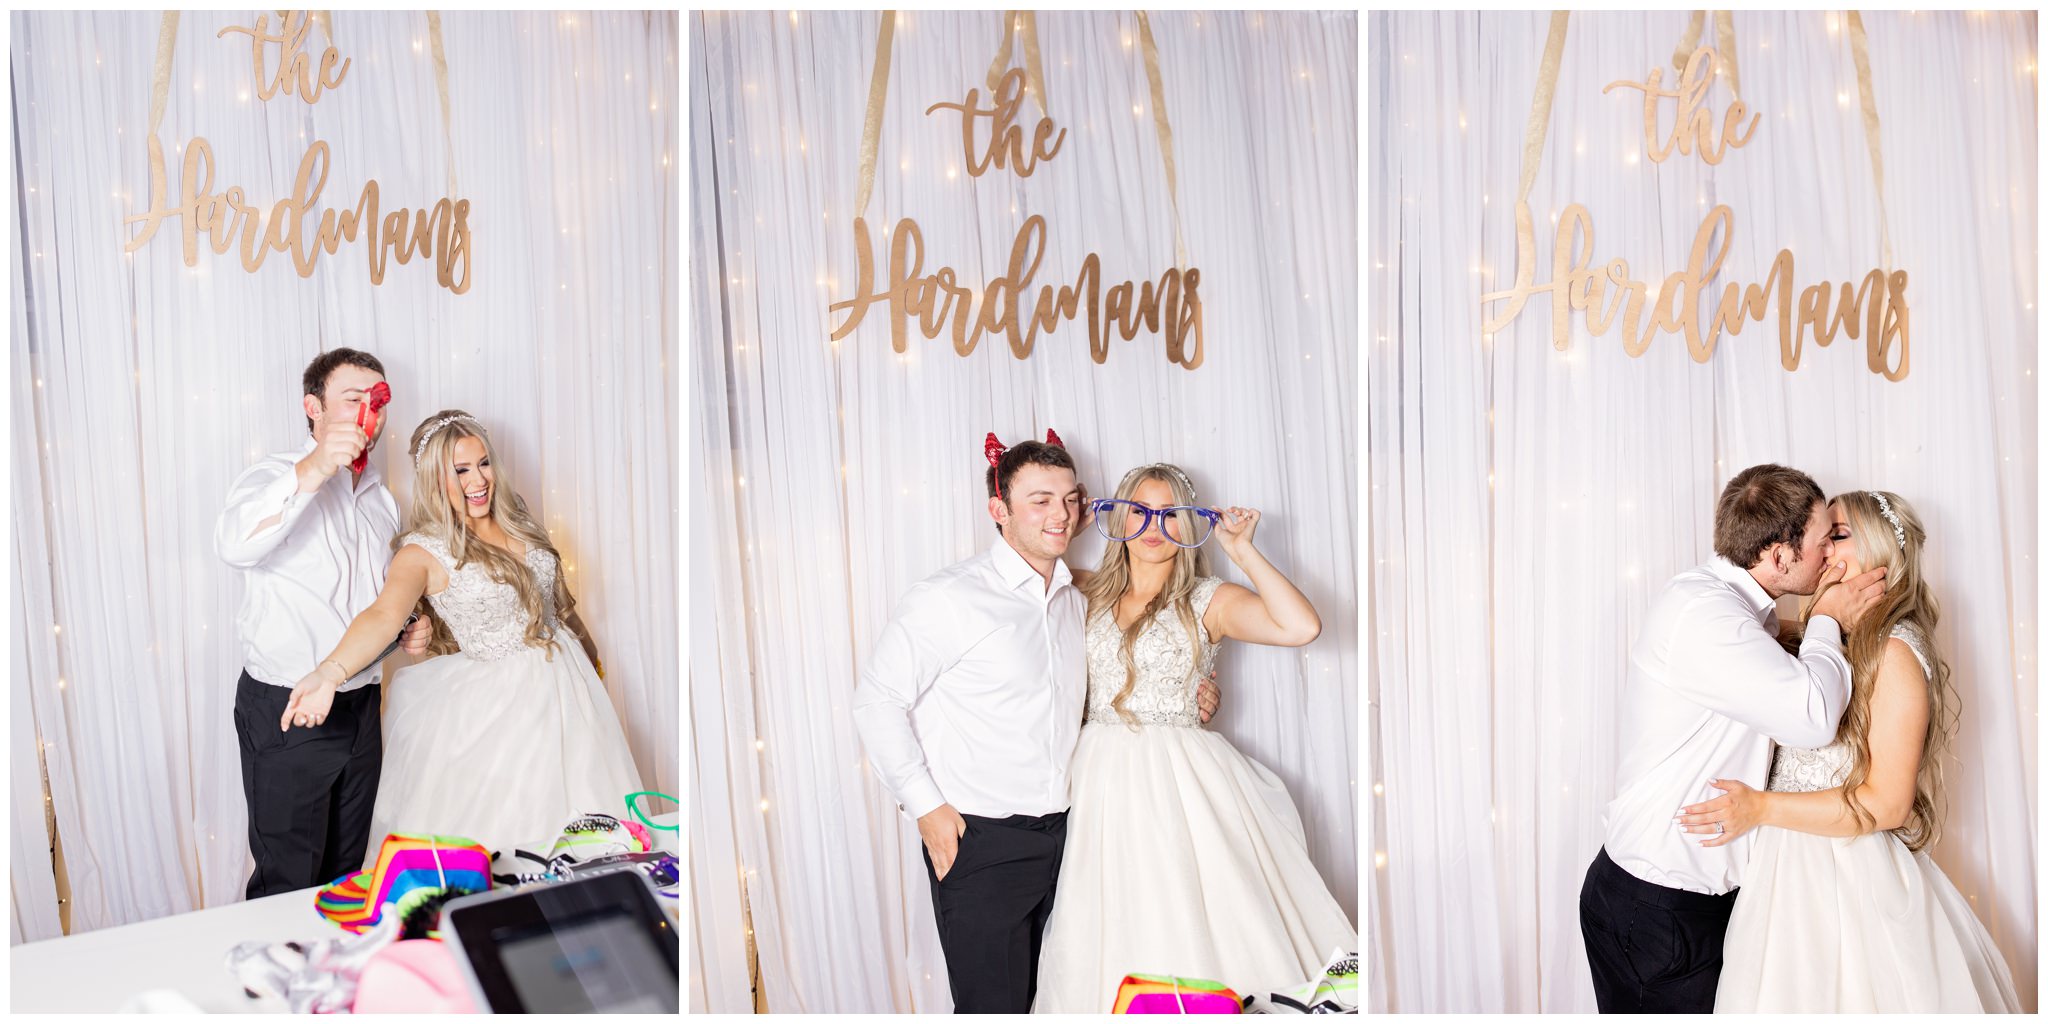 Photo booth pictures of bride and groom one above entertainment